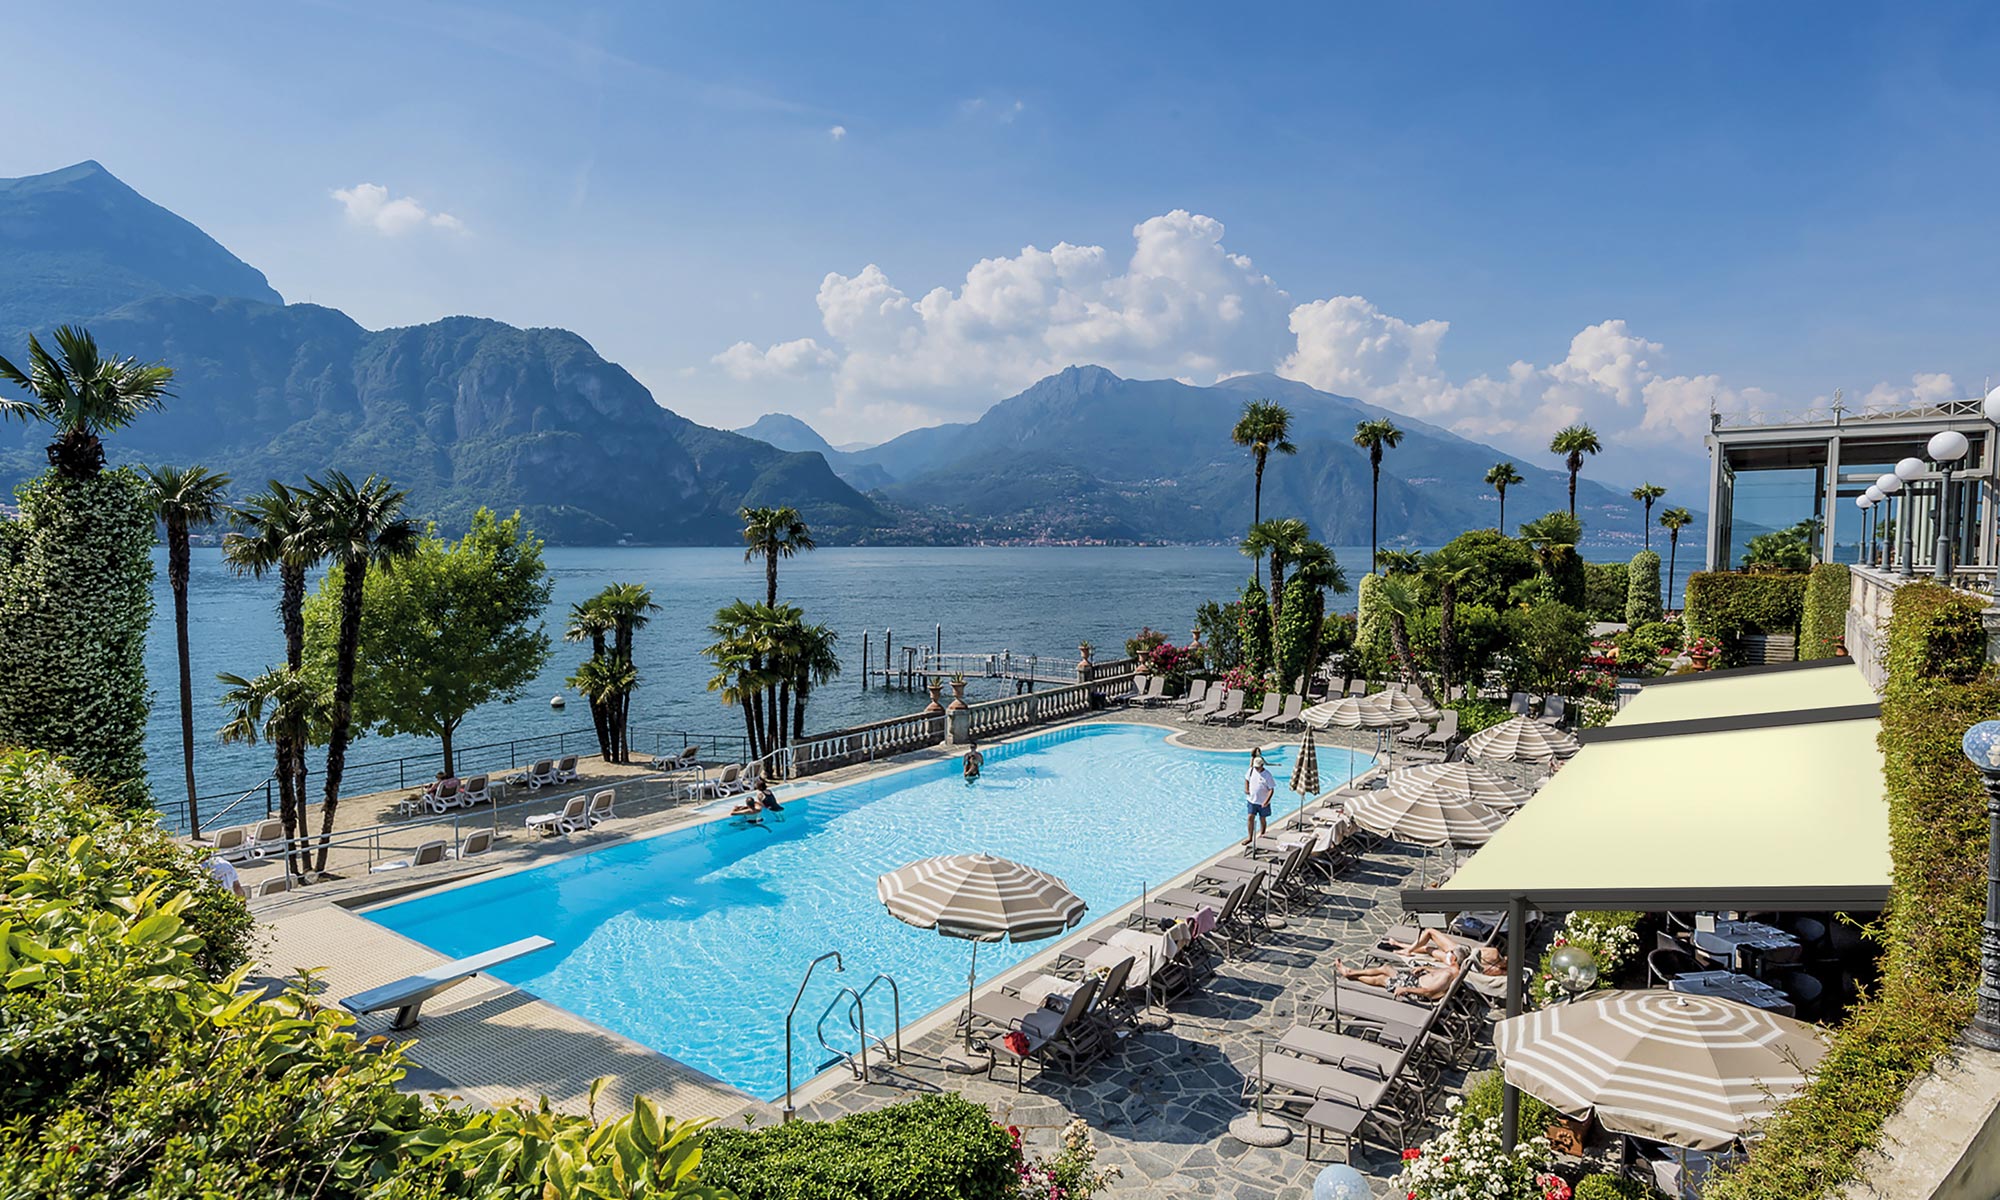 A pool lined with sun loungers, umbrellas and palm trees in front of a lake with mountains in the background